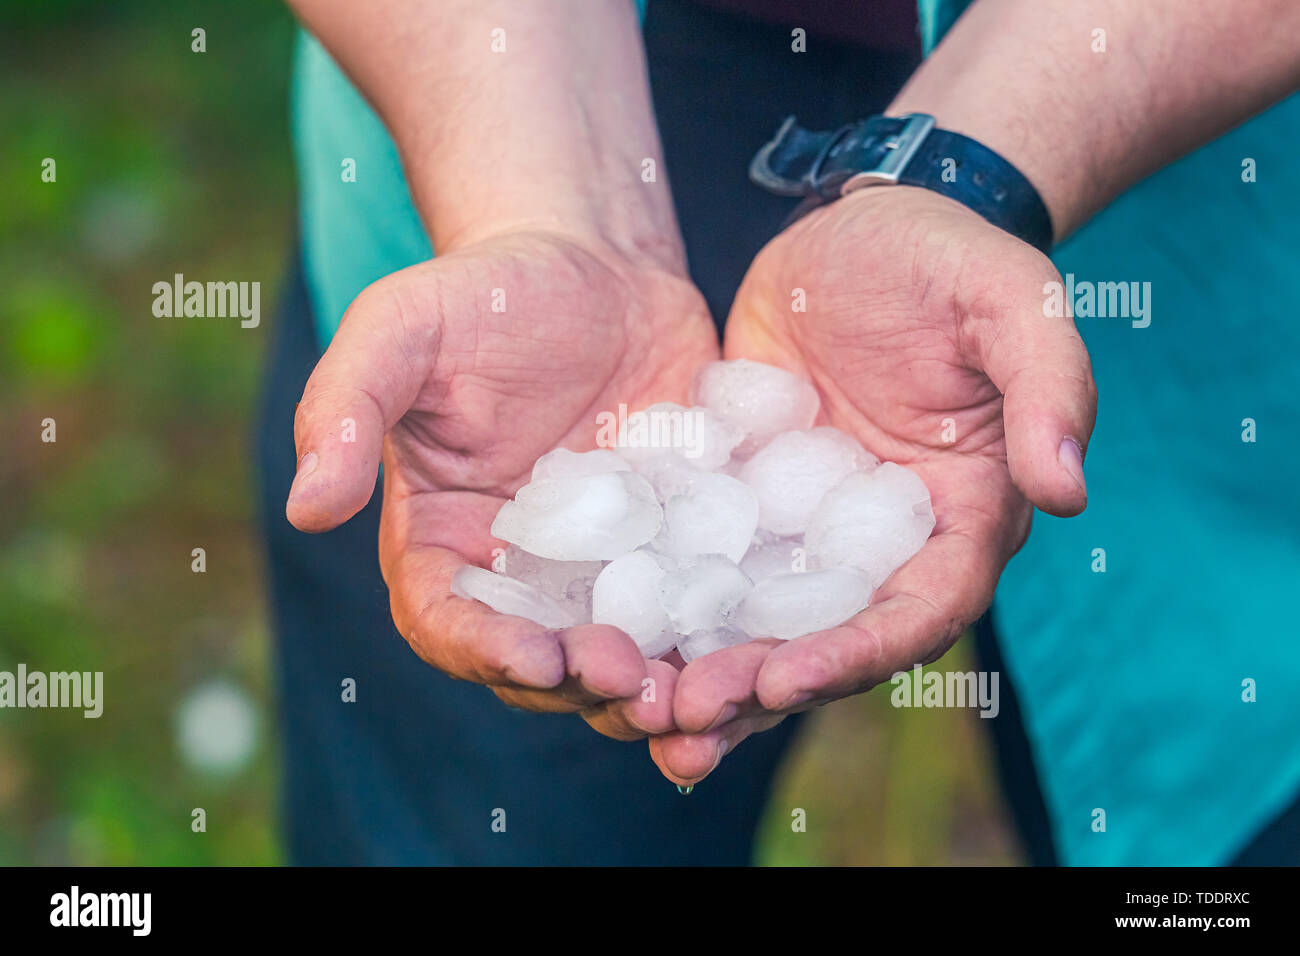 Man hand holding a hail after hailstorm Stock Photo